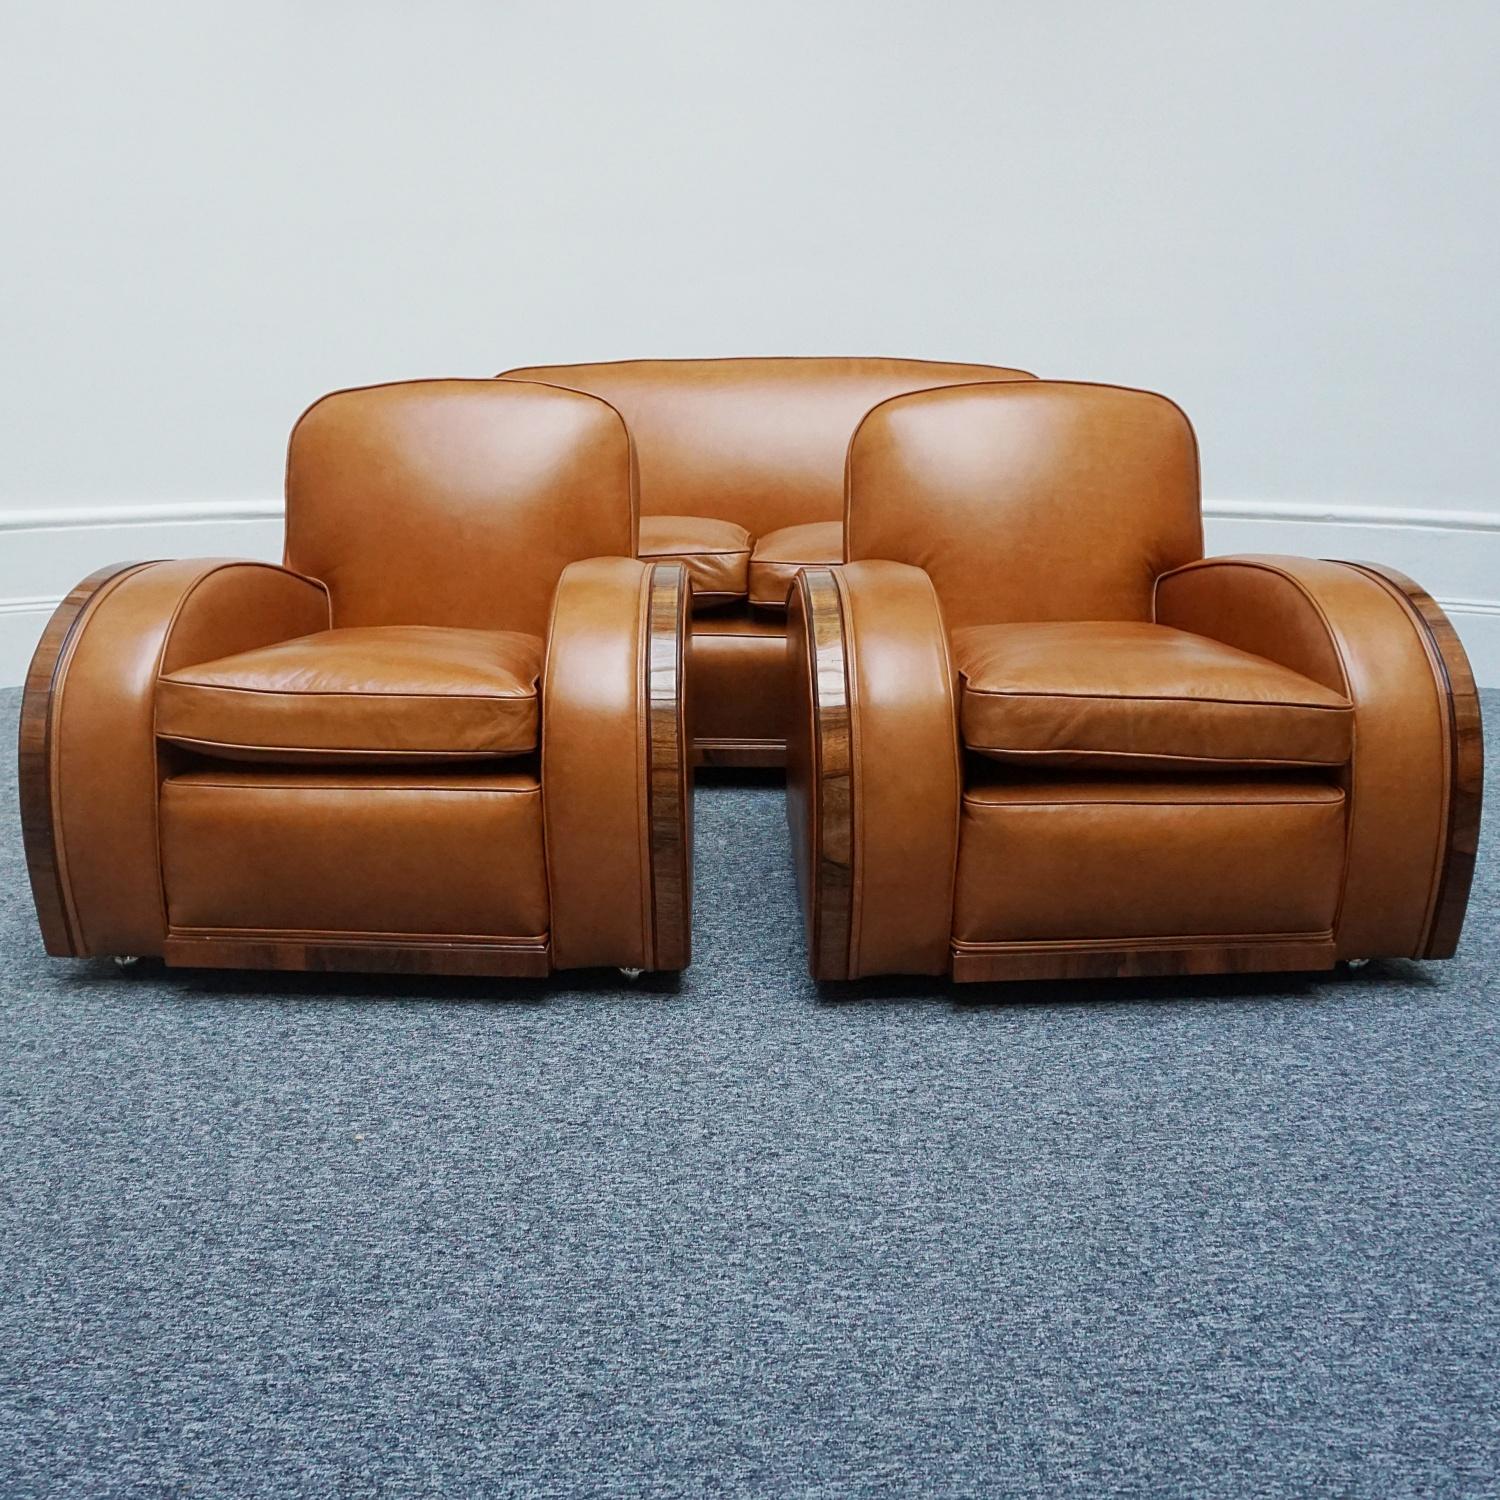 brown leather three piece suites